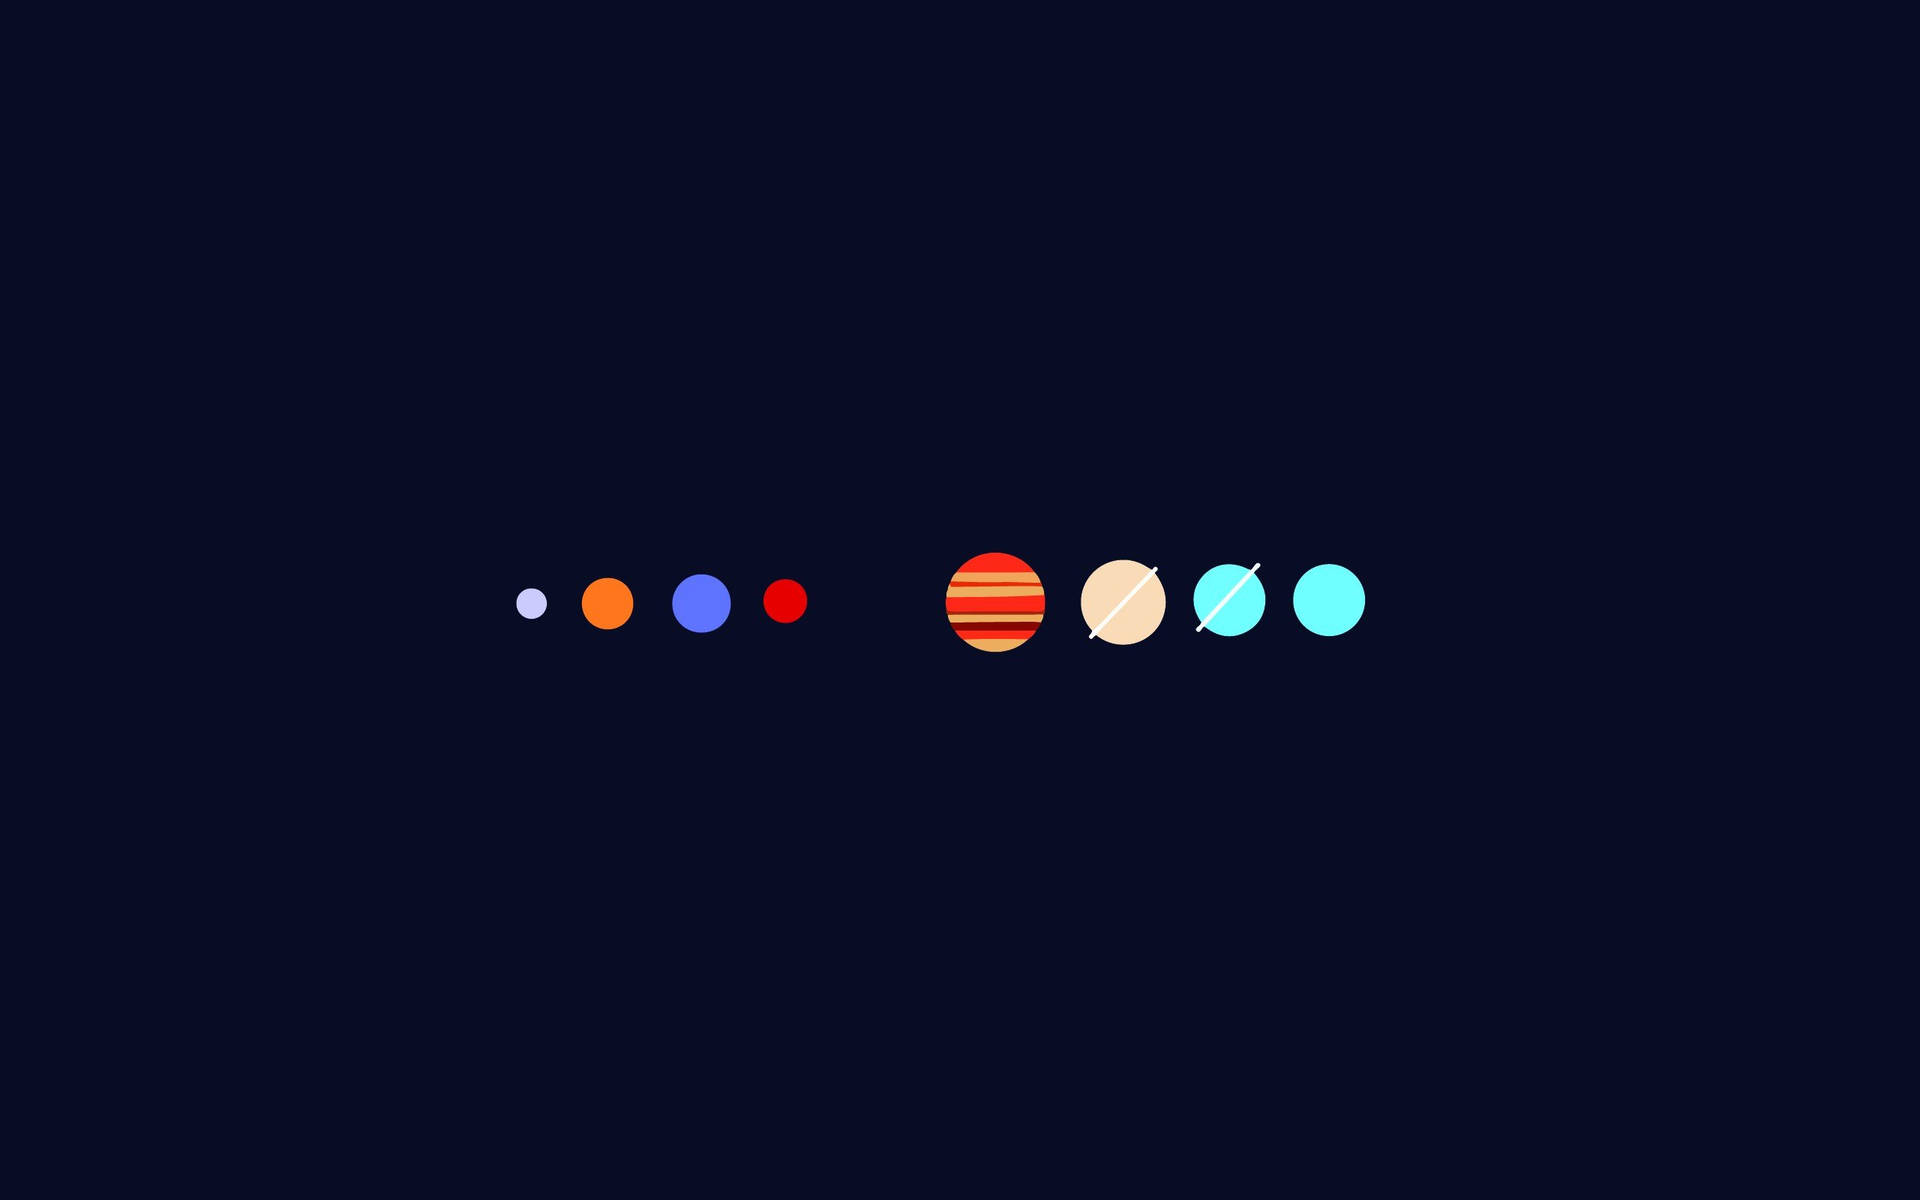 Simple Clean Solar System Wallpaper